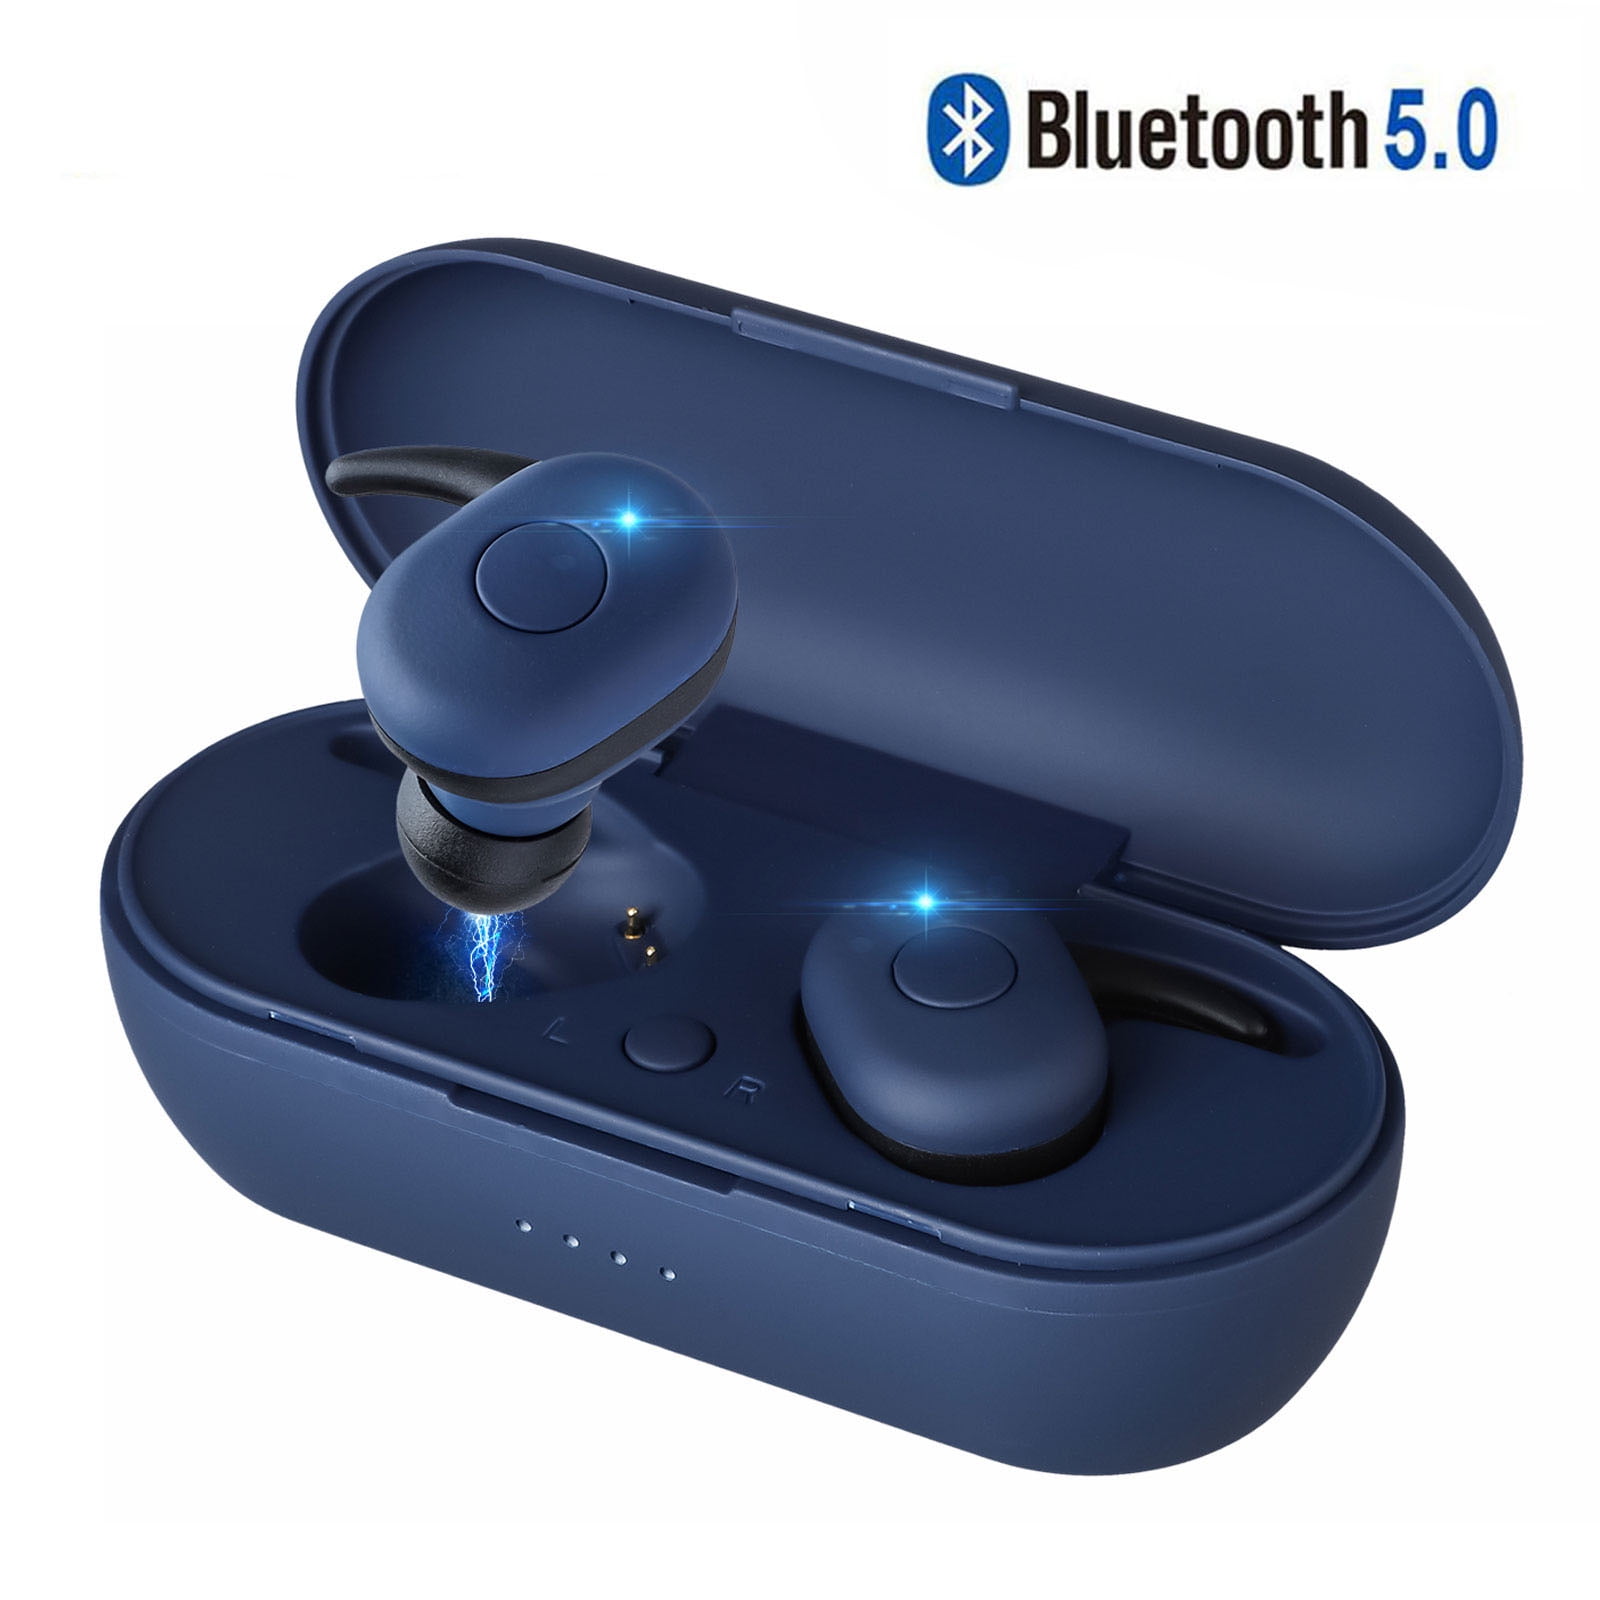 Wireless Earbuds, Bluetooth 5.0 Headphones, TWS Stereo Headphones with Mic & Charging Case, Noise Cancelling in-Ear Earphone Sweatproof Sports Earpiece, Easy Pairing, Sharing Mode, One Button Design